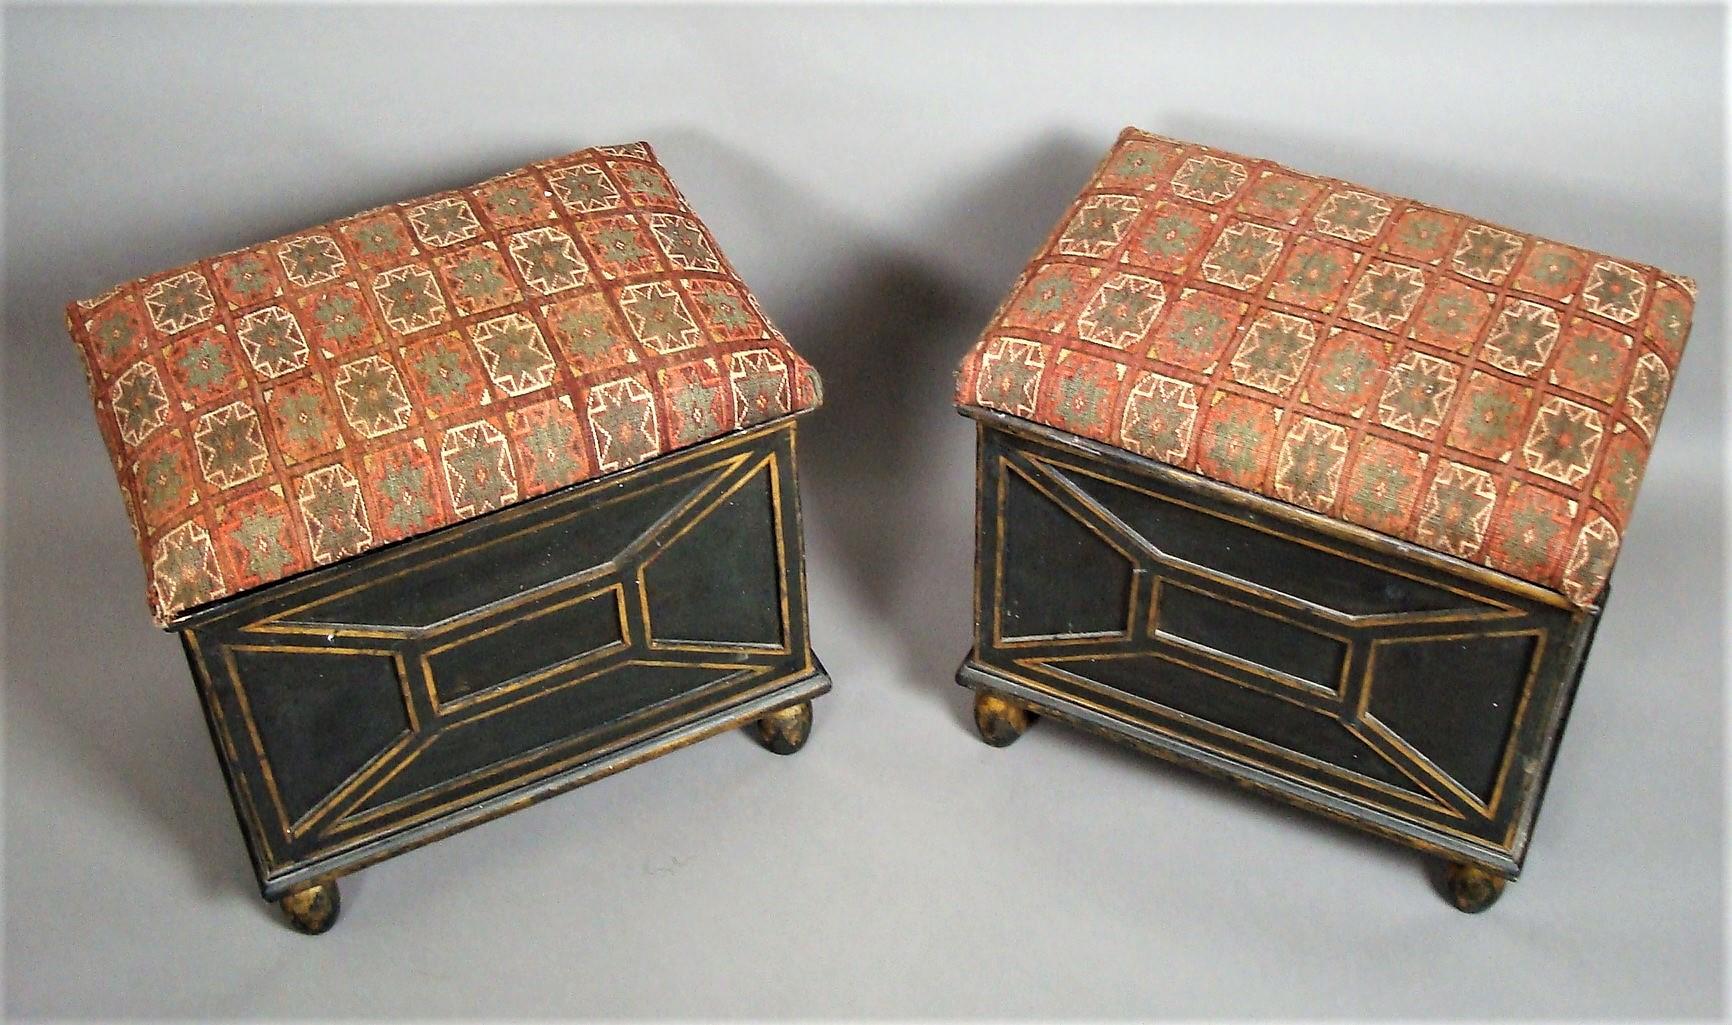 Unusual 19th century pair of decorated box stools with original black and gilt painted decoration; the padded rectangular seats/lids upholstered in old patterned carpert, opening to reveal and old paper lined storage compartment. The panelled sides